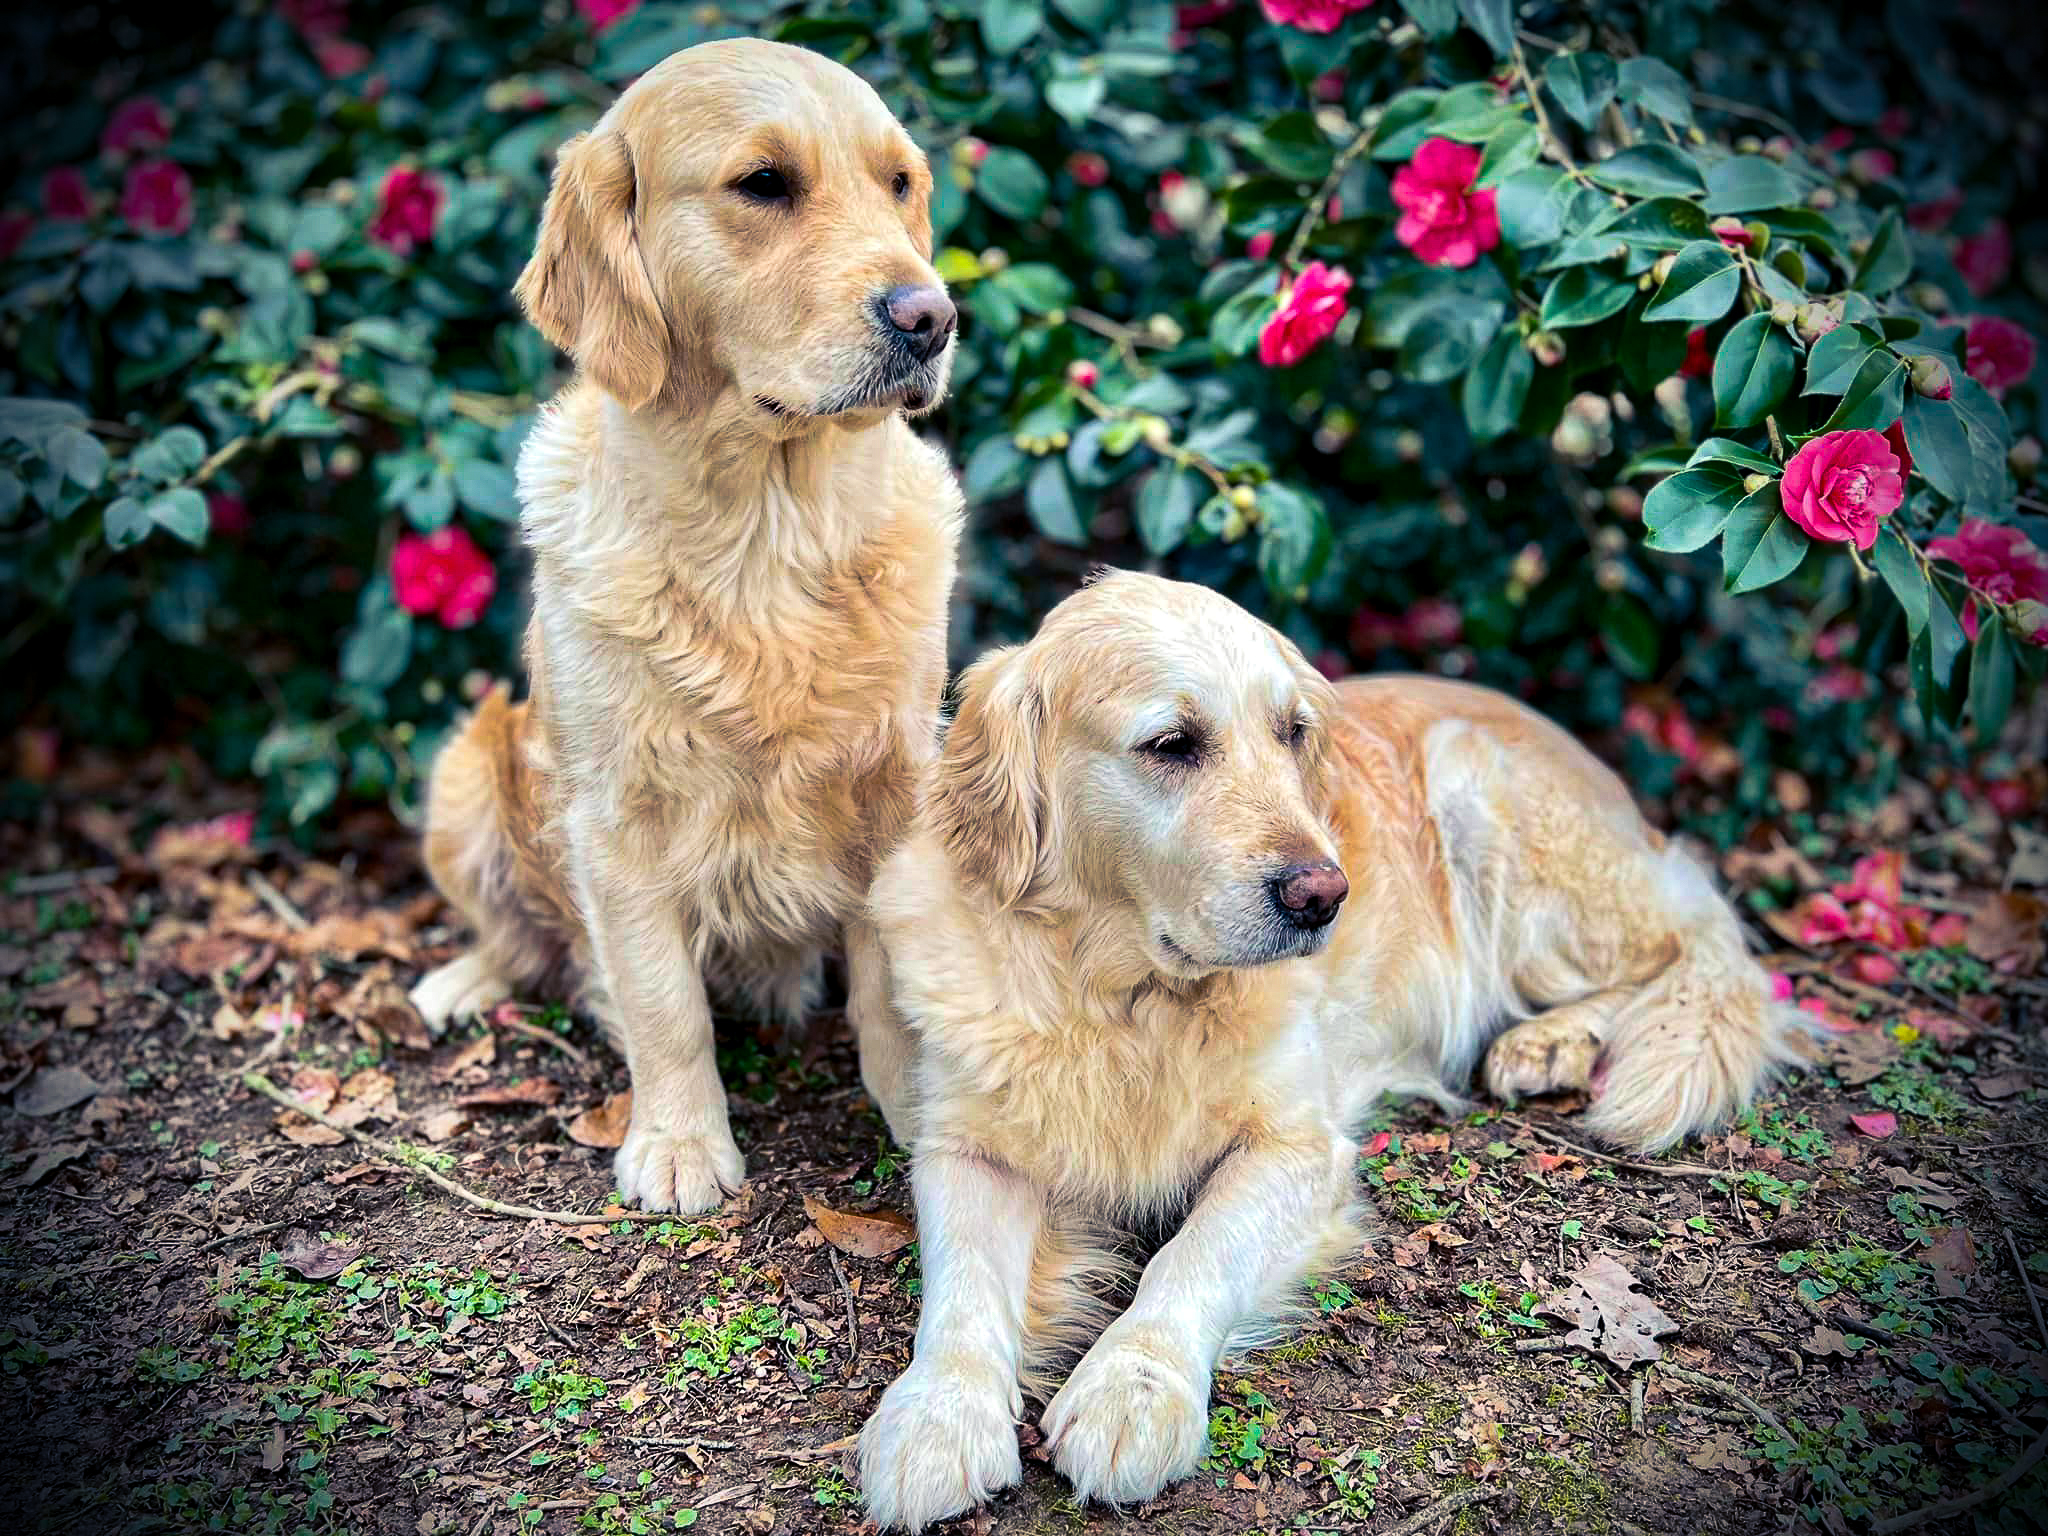 Forestry elevage familial golden retrievers retriever chien river normandie manche canisy-07